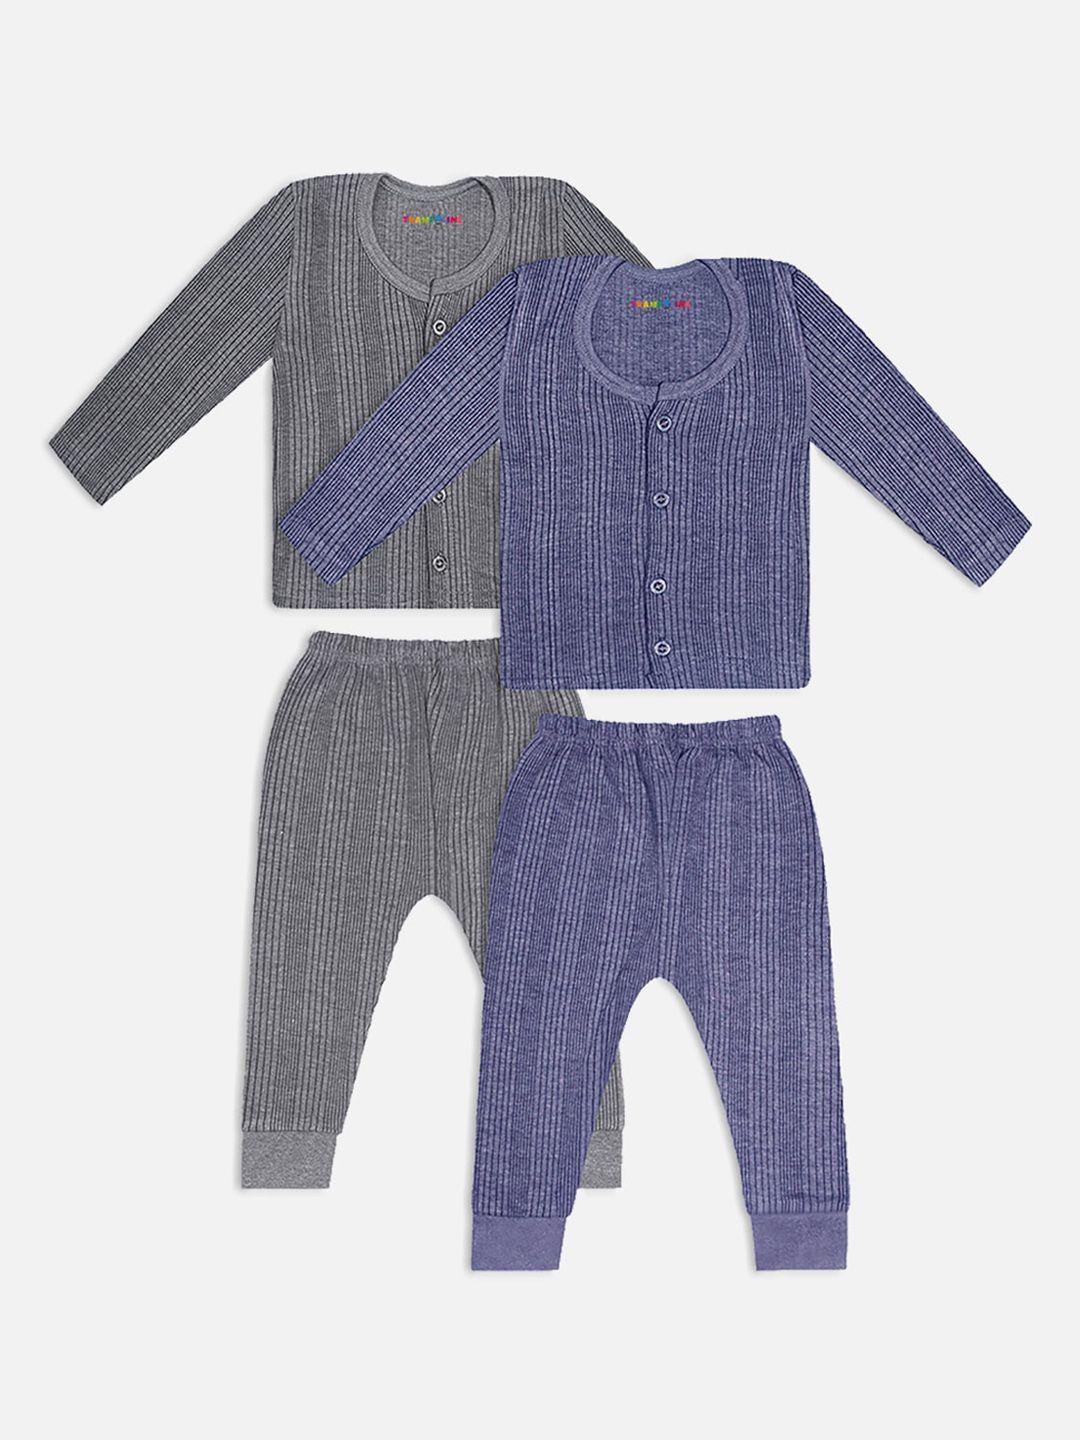 trampoline-infants-pack-of-2-striped-cotton-thermal-set